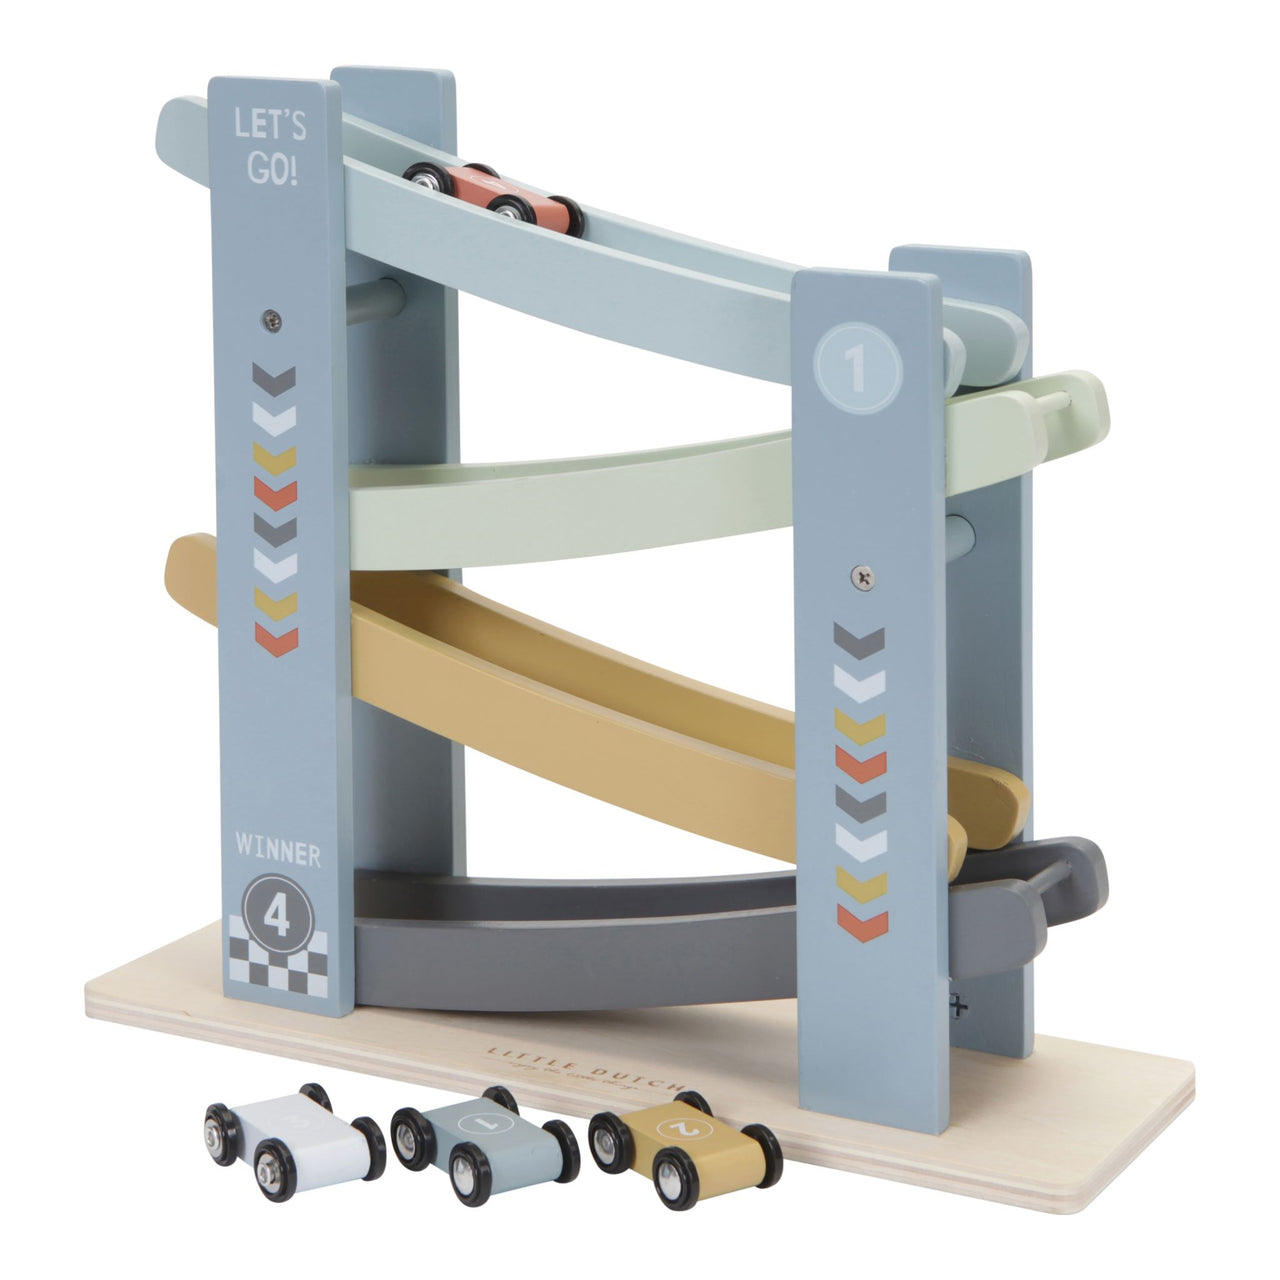 With this cheerful wooden Little Dutch ramp racer including 4 cars your little one will have a great time. Place the cars one by one on top of the race track, let them go and they will race down. Kids love this!